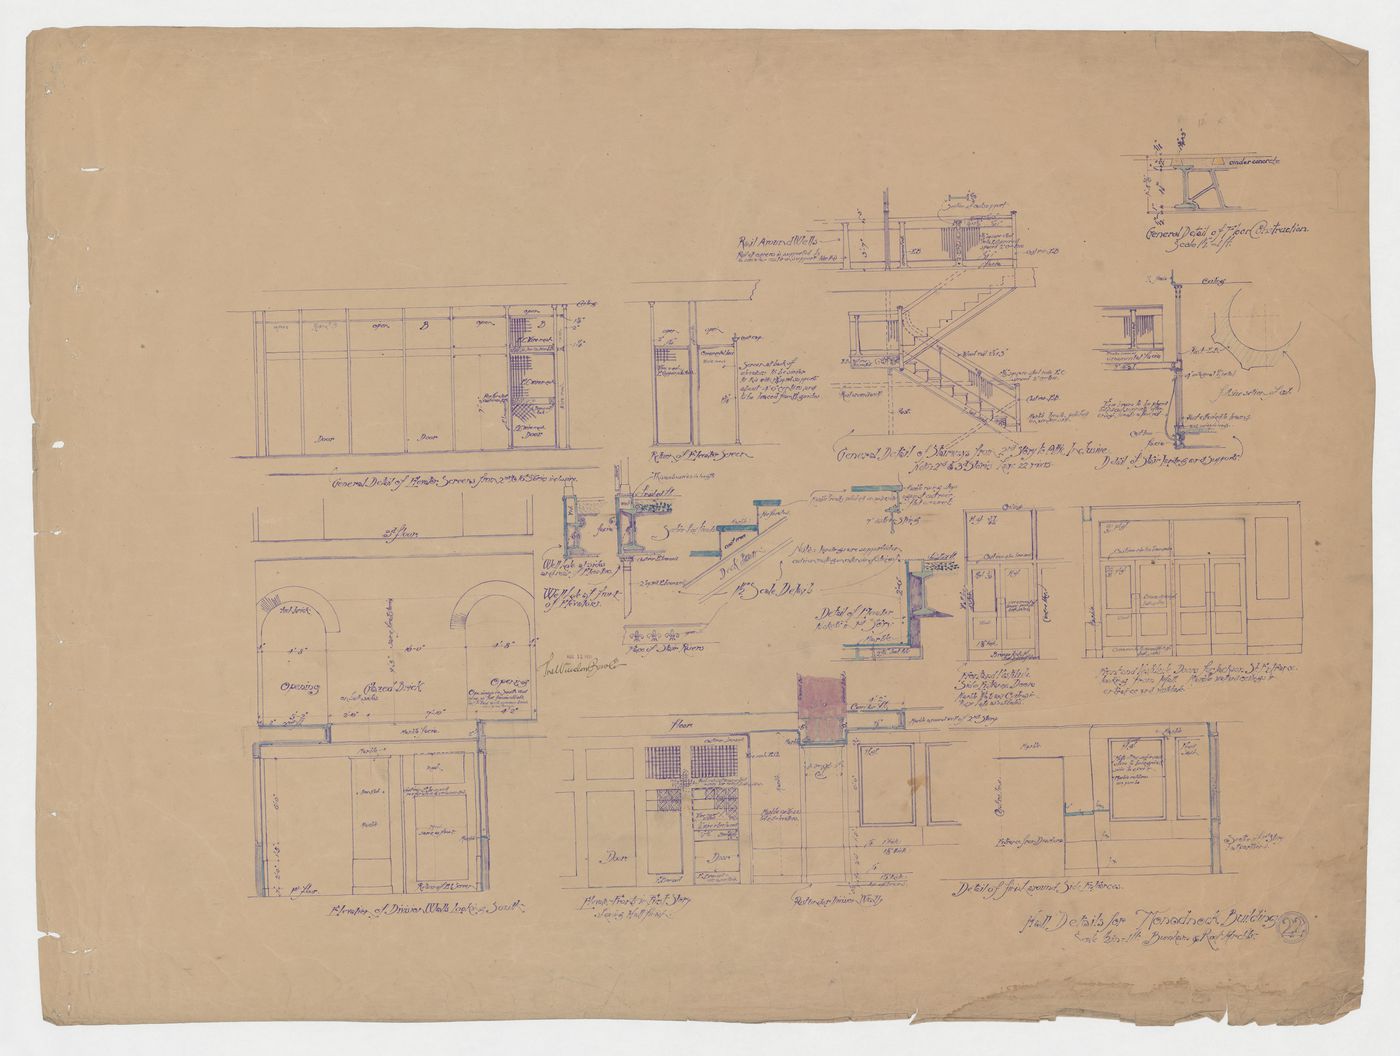 Monadnock Building, Chicago: Partial elevations and sectional and plan details for entrances, doors, stairs and elevator enclosure